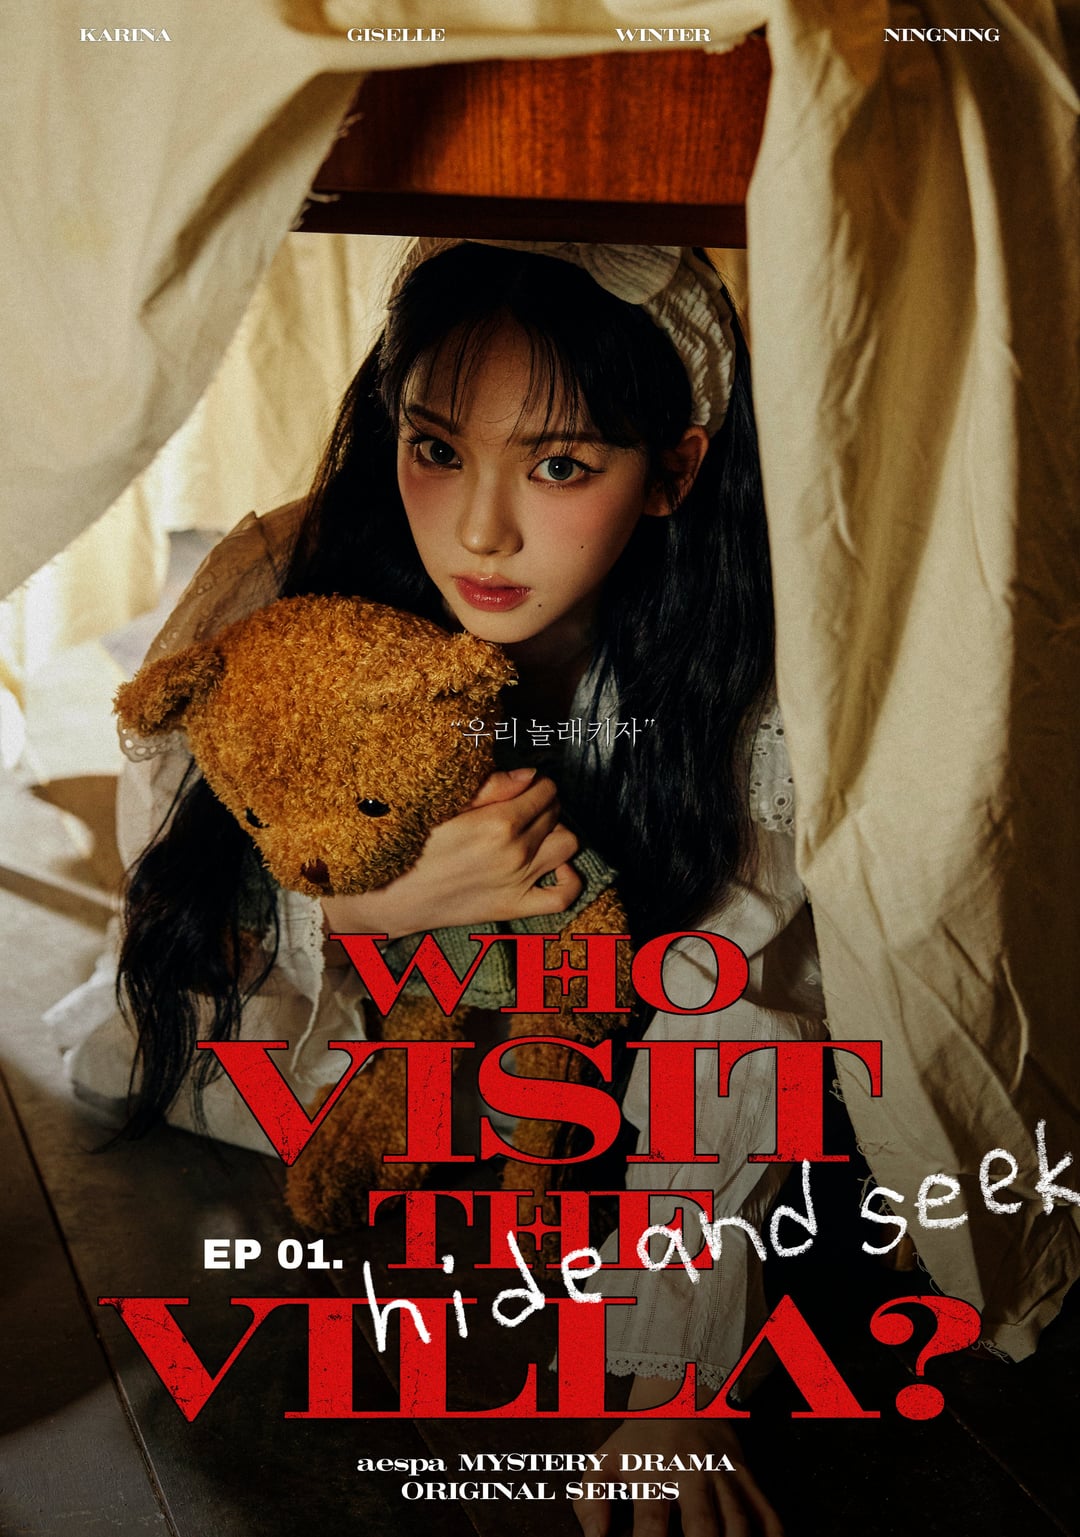 231119 aespa - ‘Who visit the VILLA?’｜EP 01. Hide and Seek Poster